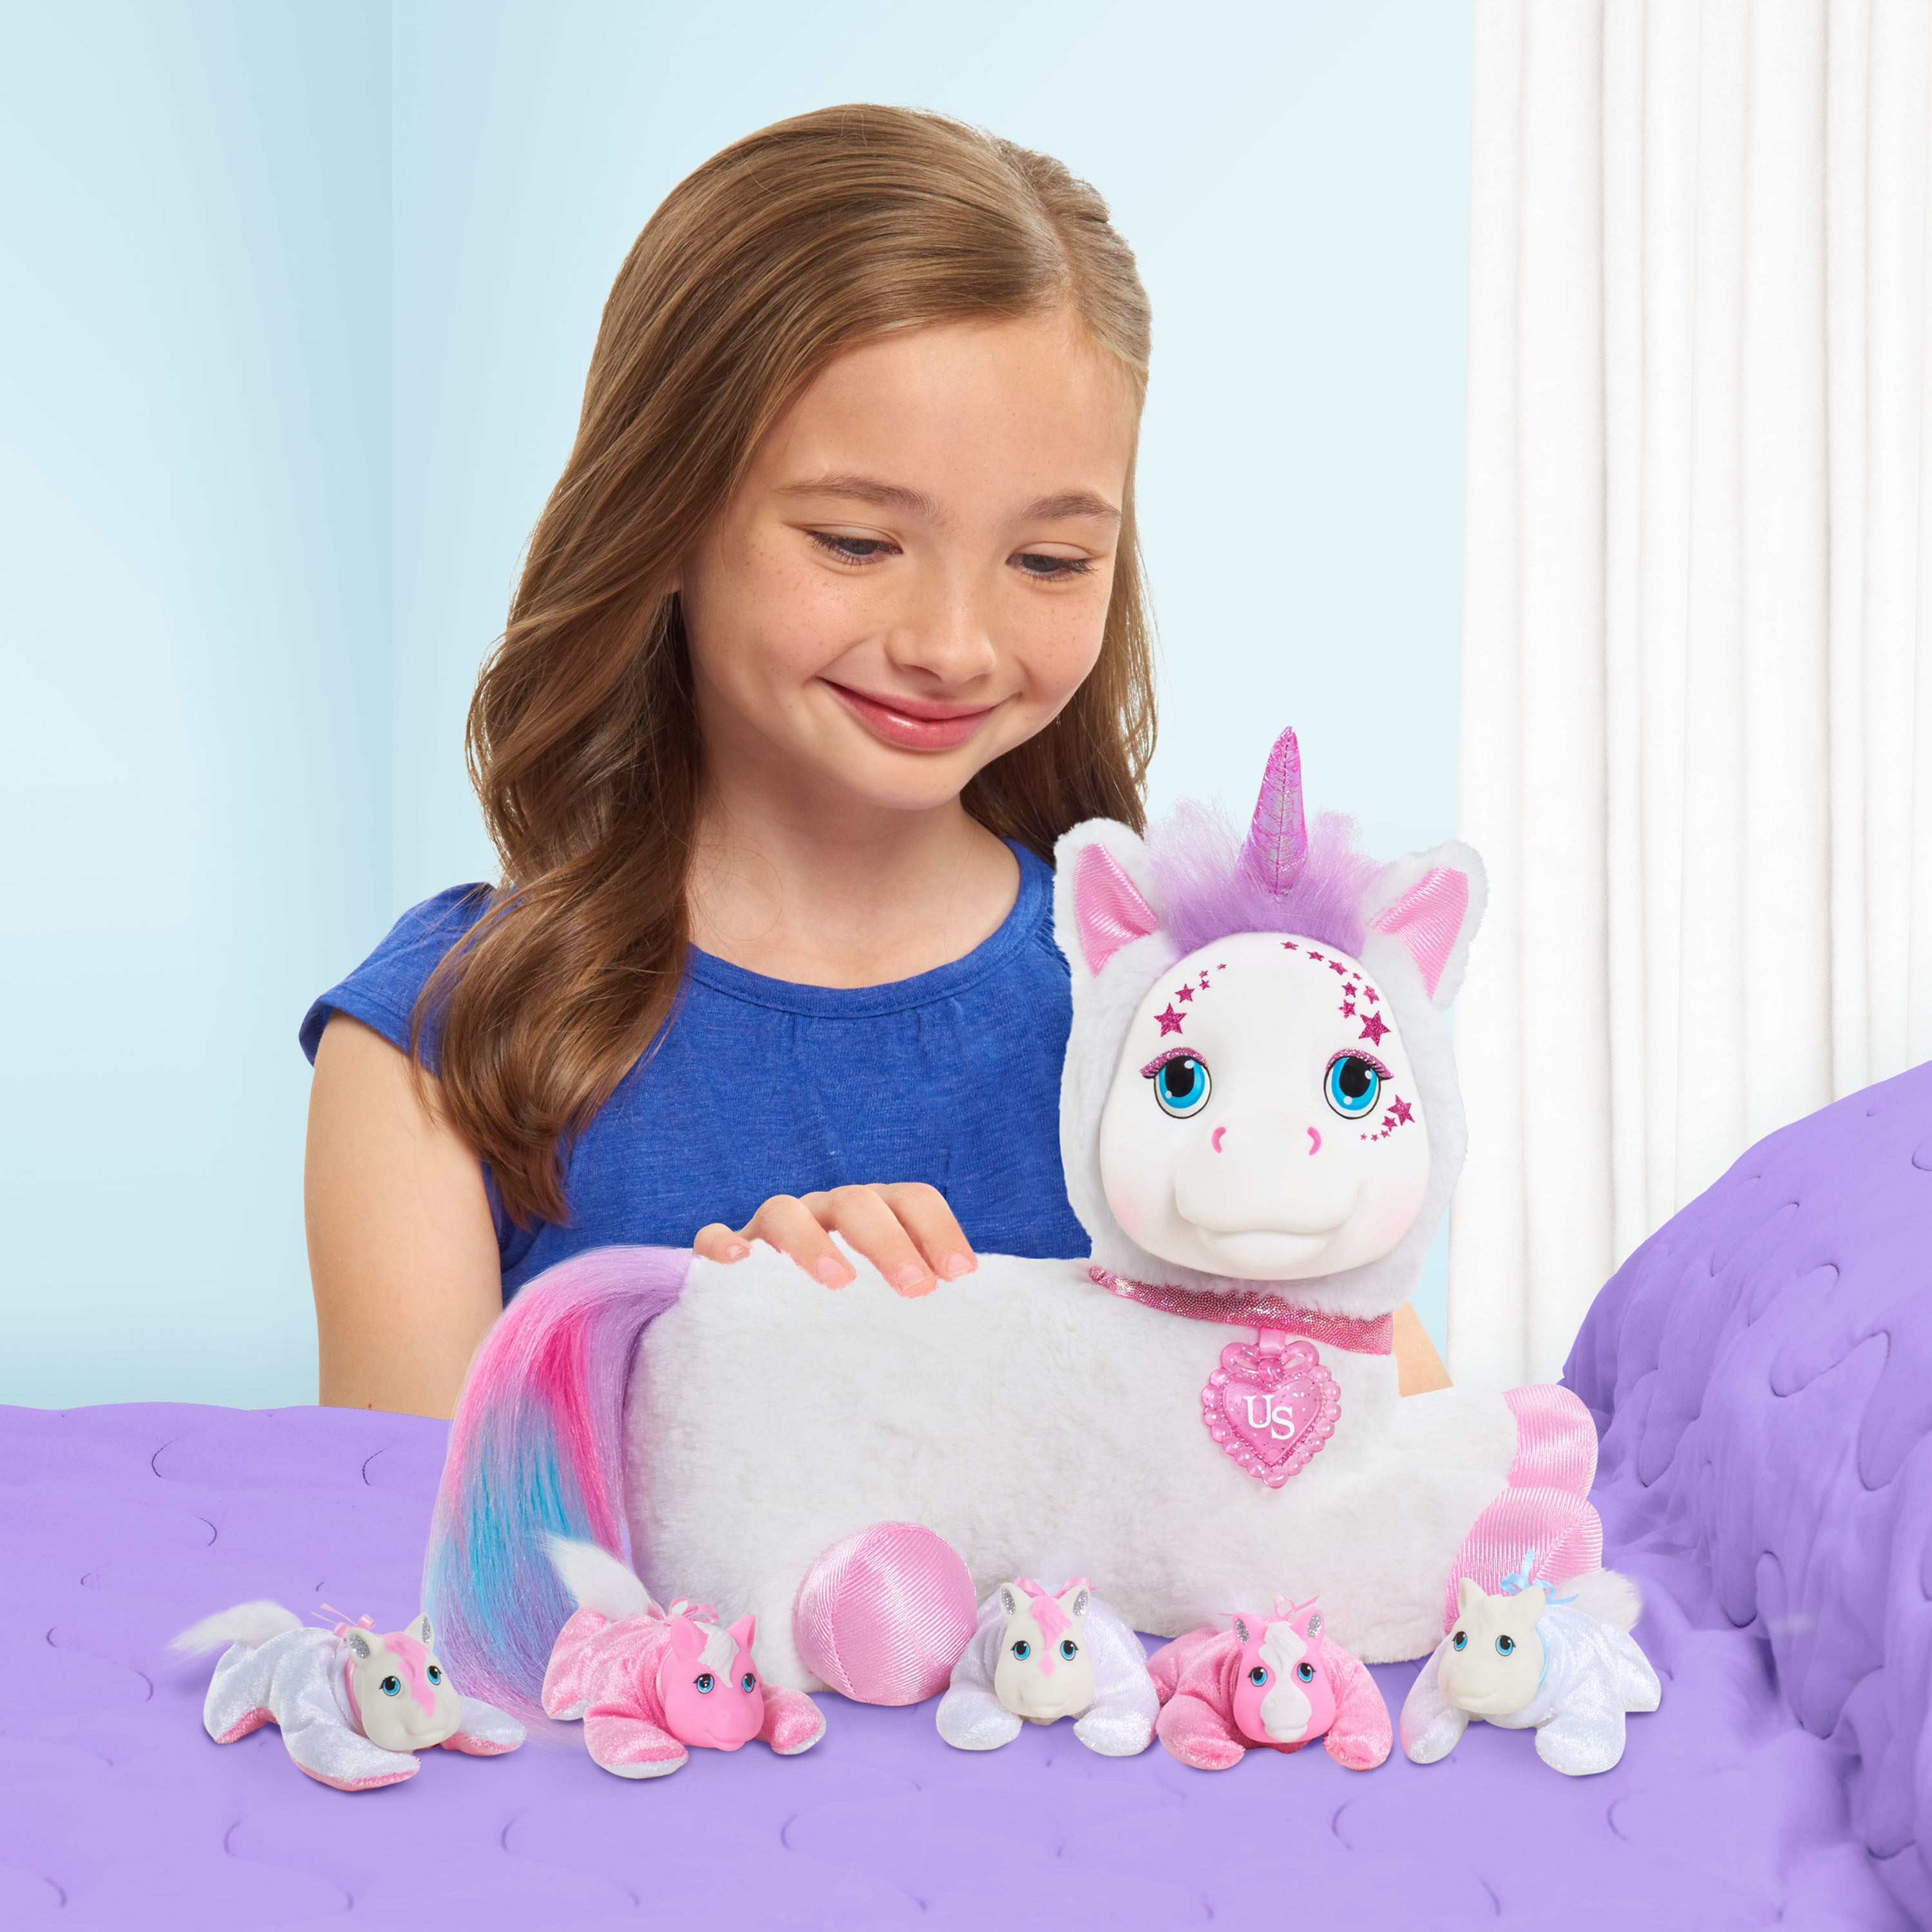 Unicorn Surprise Aria, White, Stuffed Animal Unicorn and Babies, Toys for Kids,  Kids Toys for Ages 3 Up, Gifts and Presents